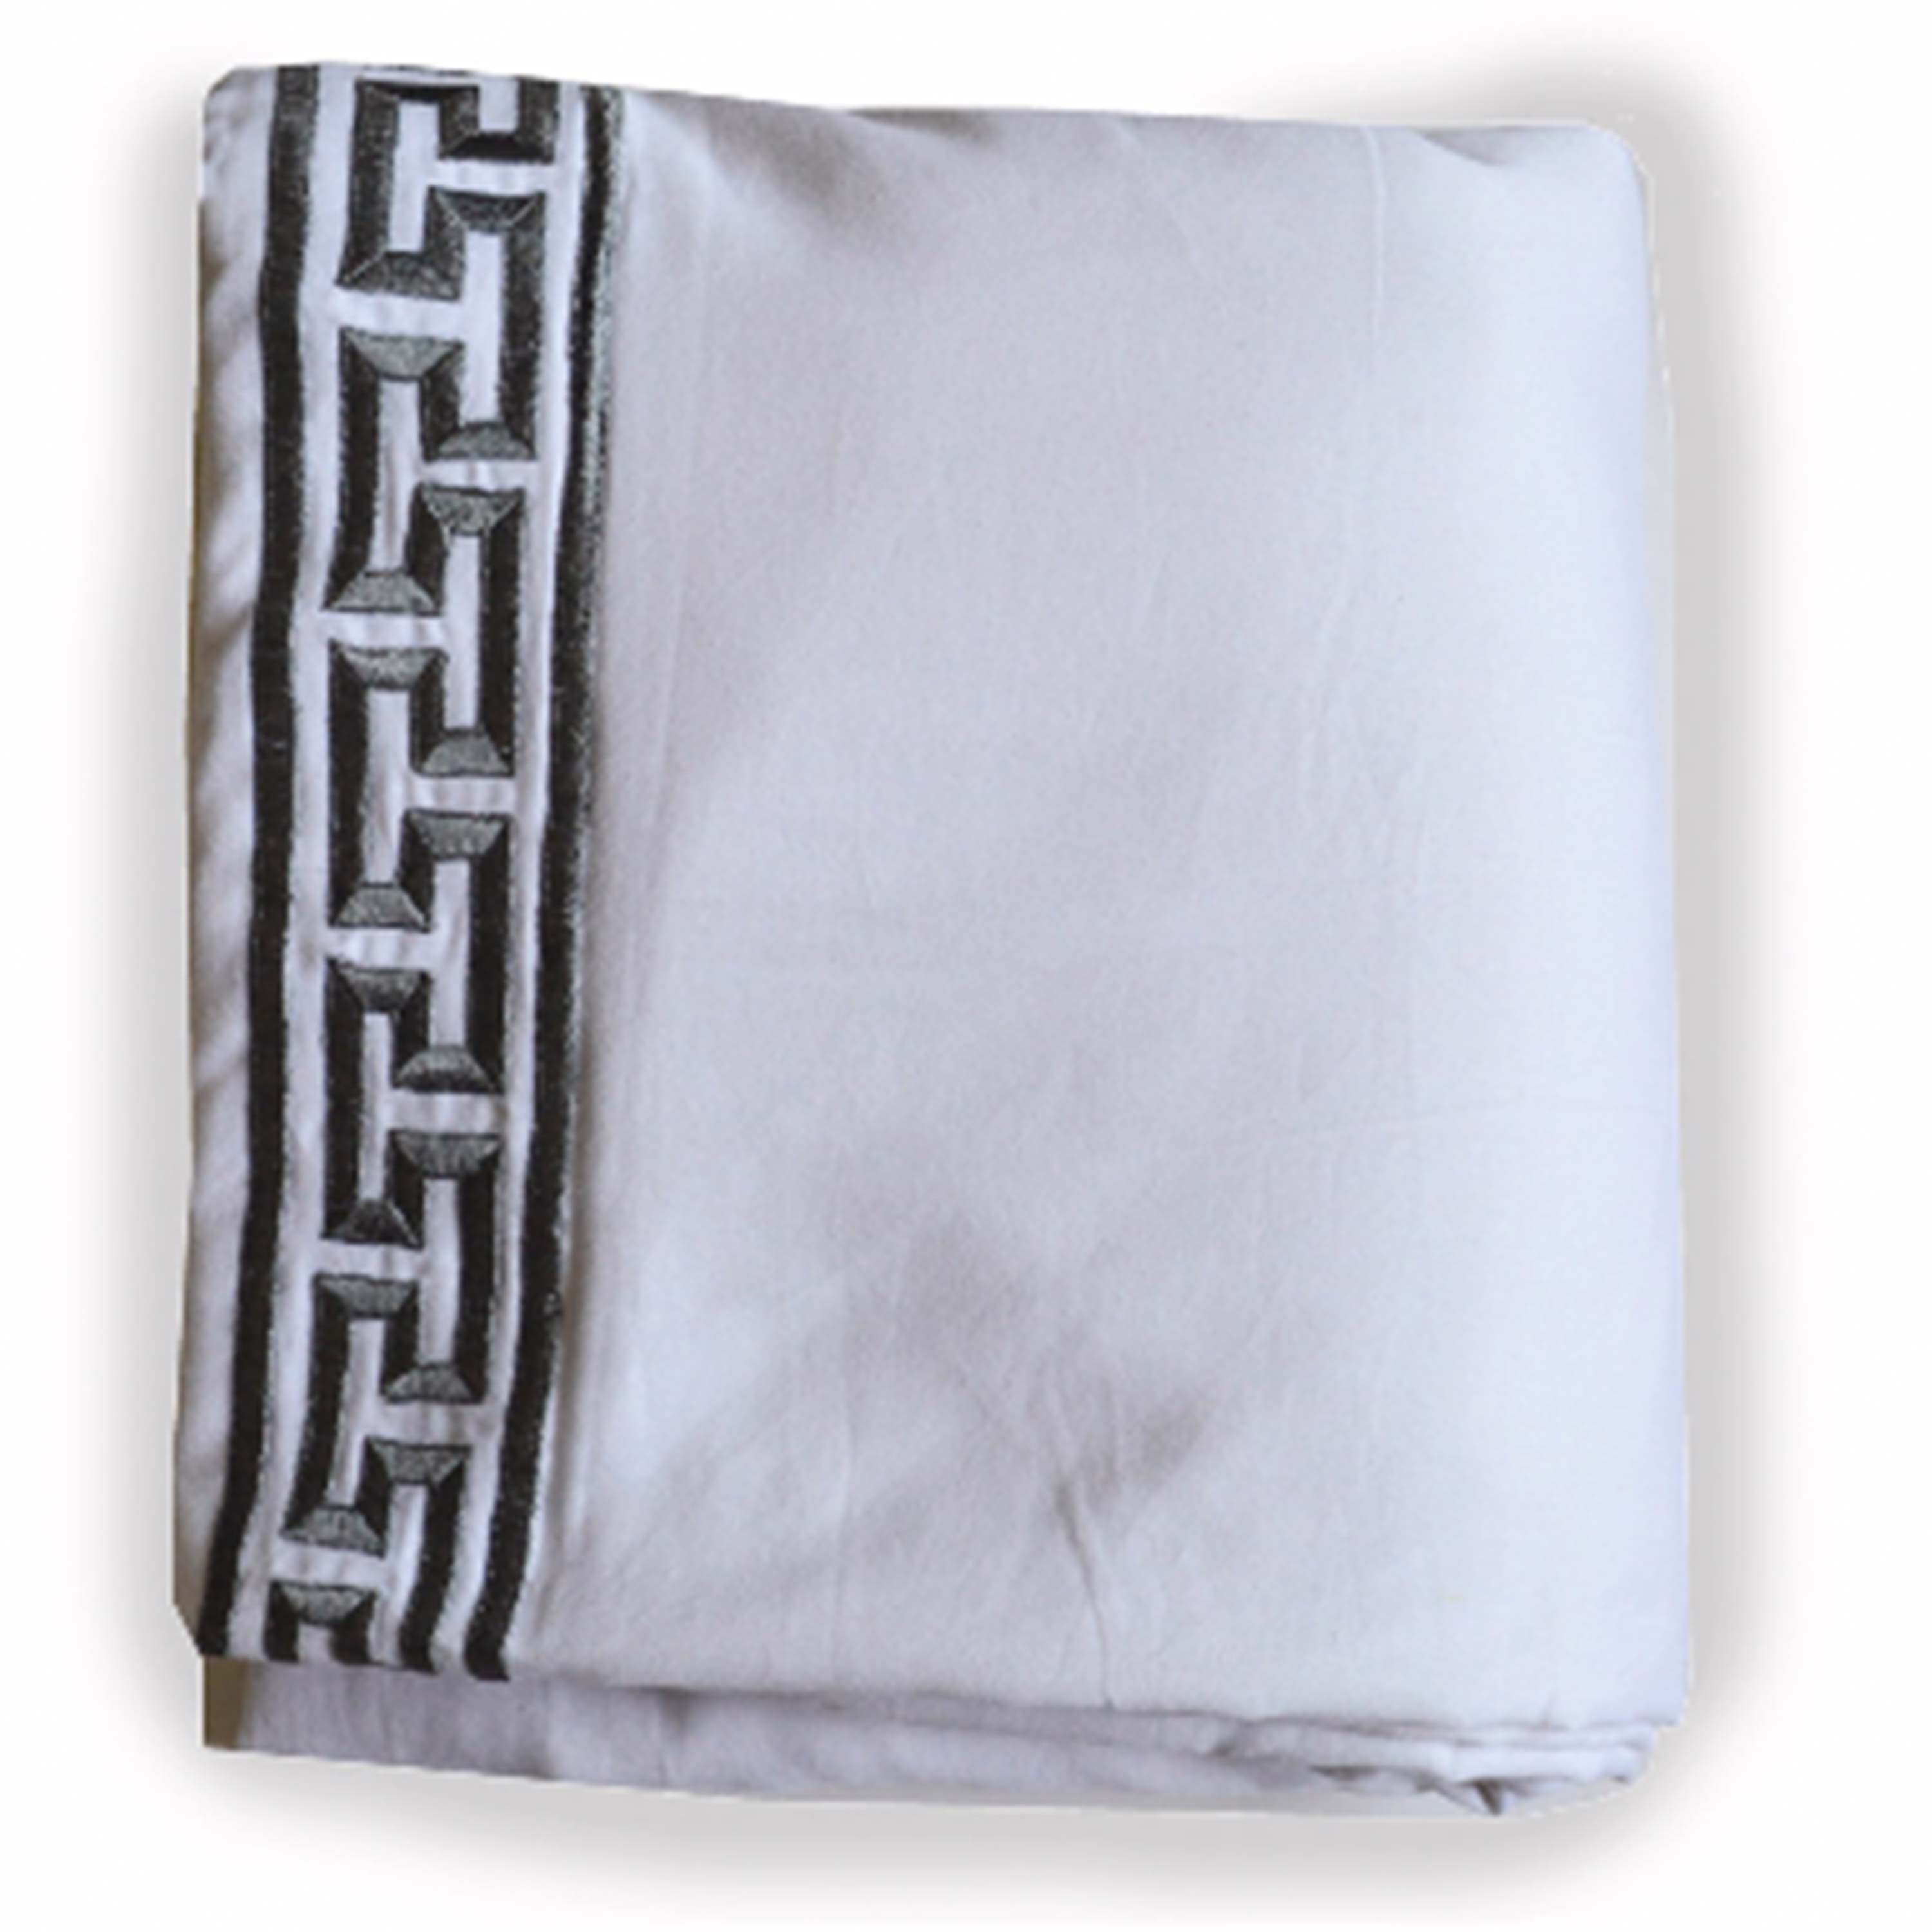 Greek Key Embroidered Duvet Cover in White Cotton Geometric Bedding Comforter Cover Wedding Anniversary Housewarming Gifts All Sizes